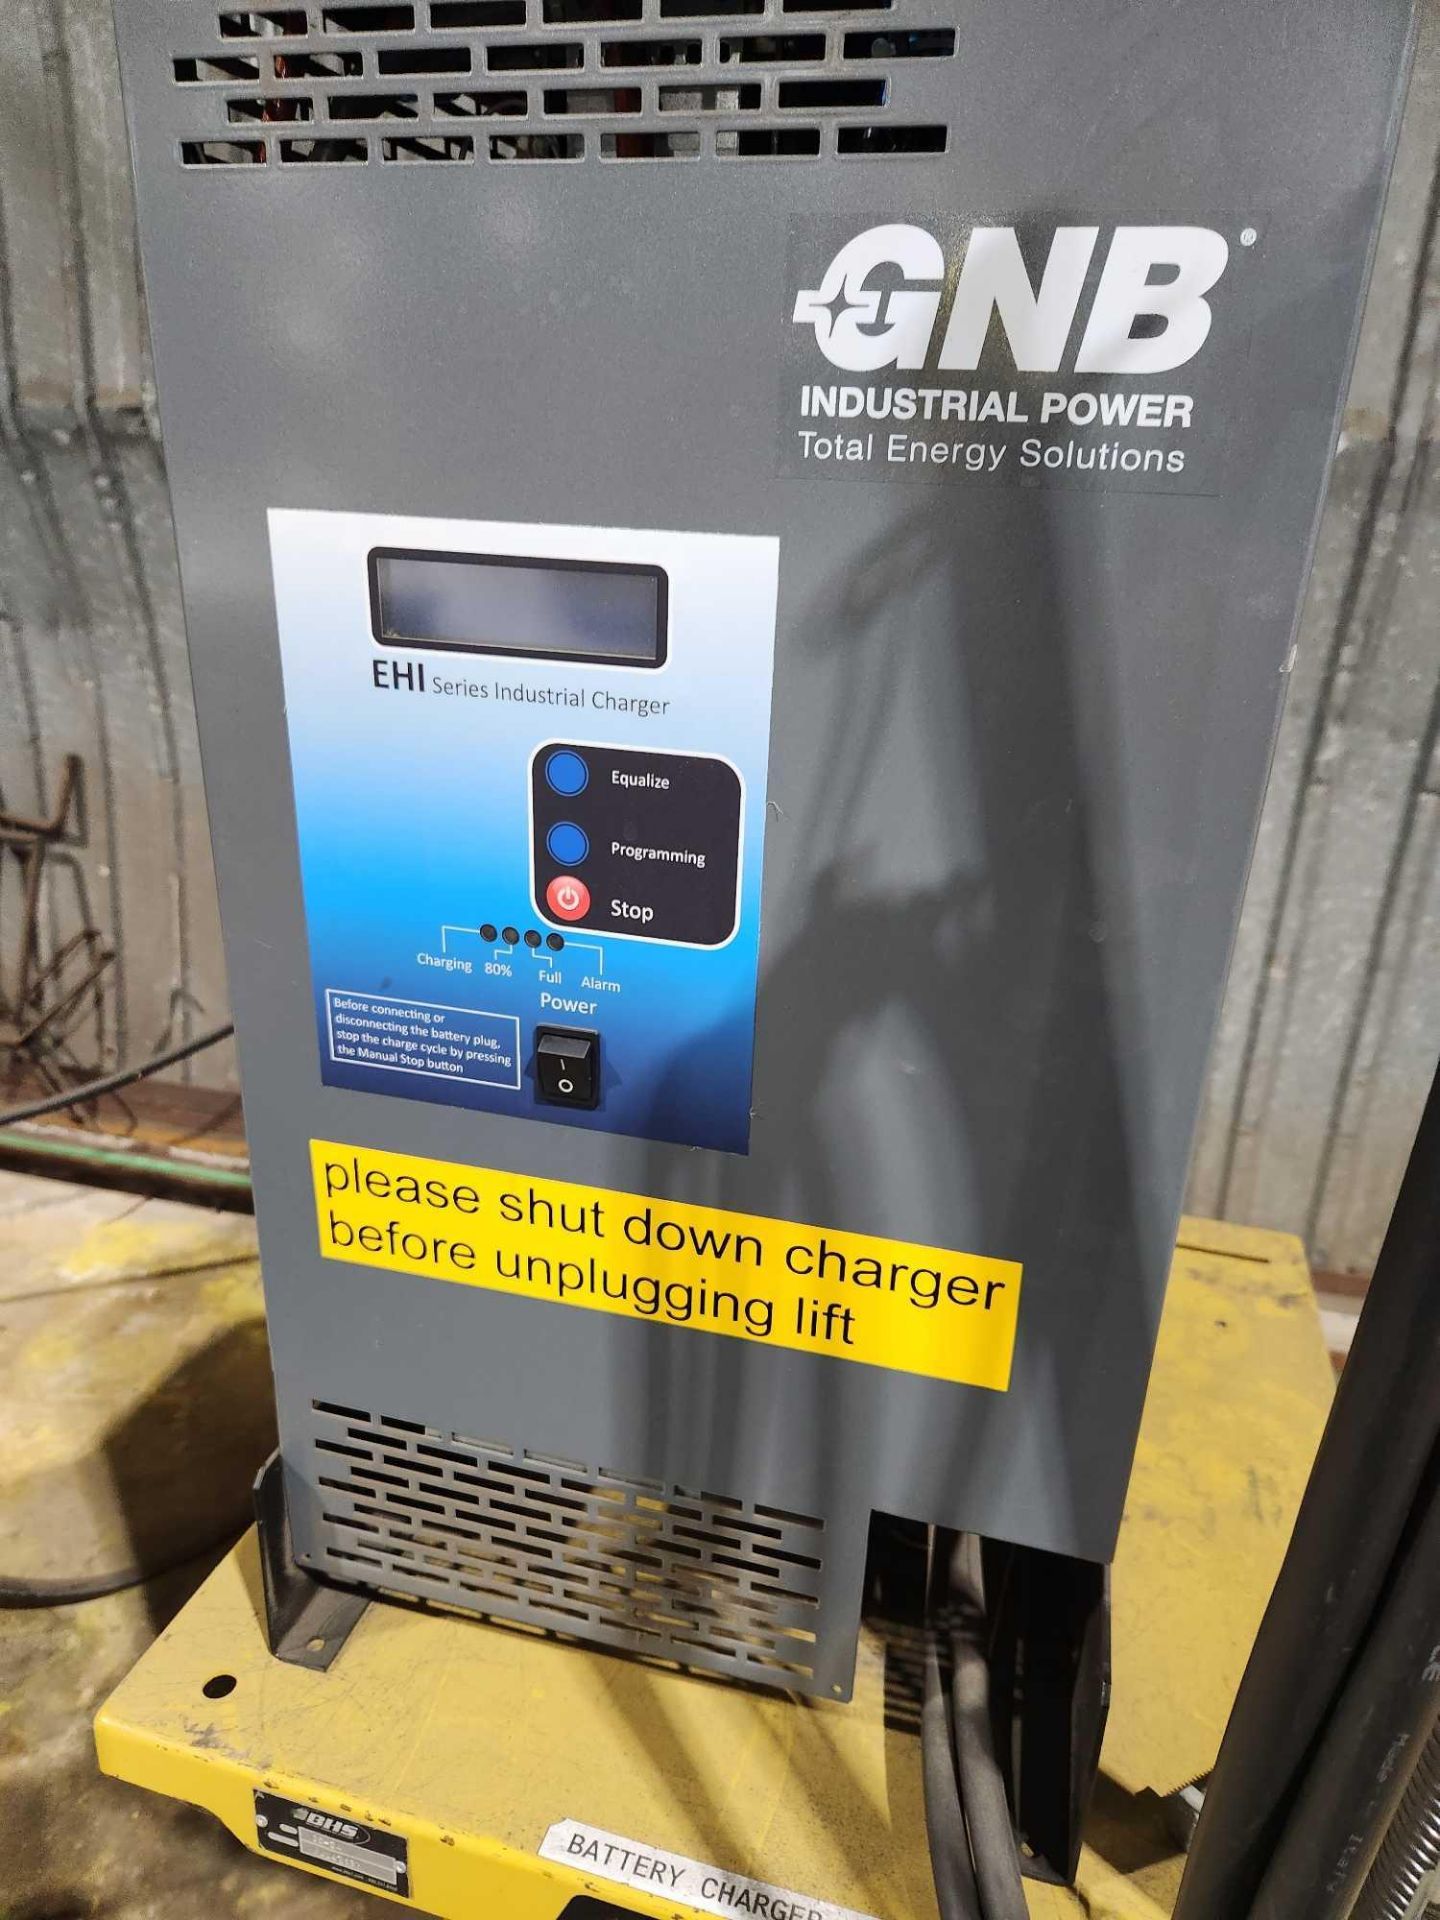 2017 GNB battery charger, mn EHIMV48H260, 3 phase with stand (CHARGER 3) (WAREHOUSE) - Image 2 of 3